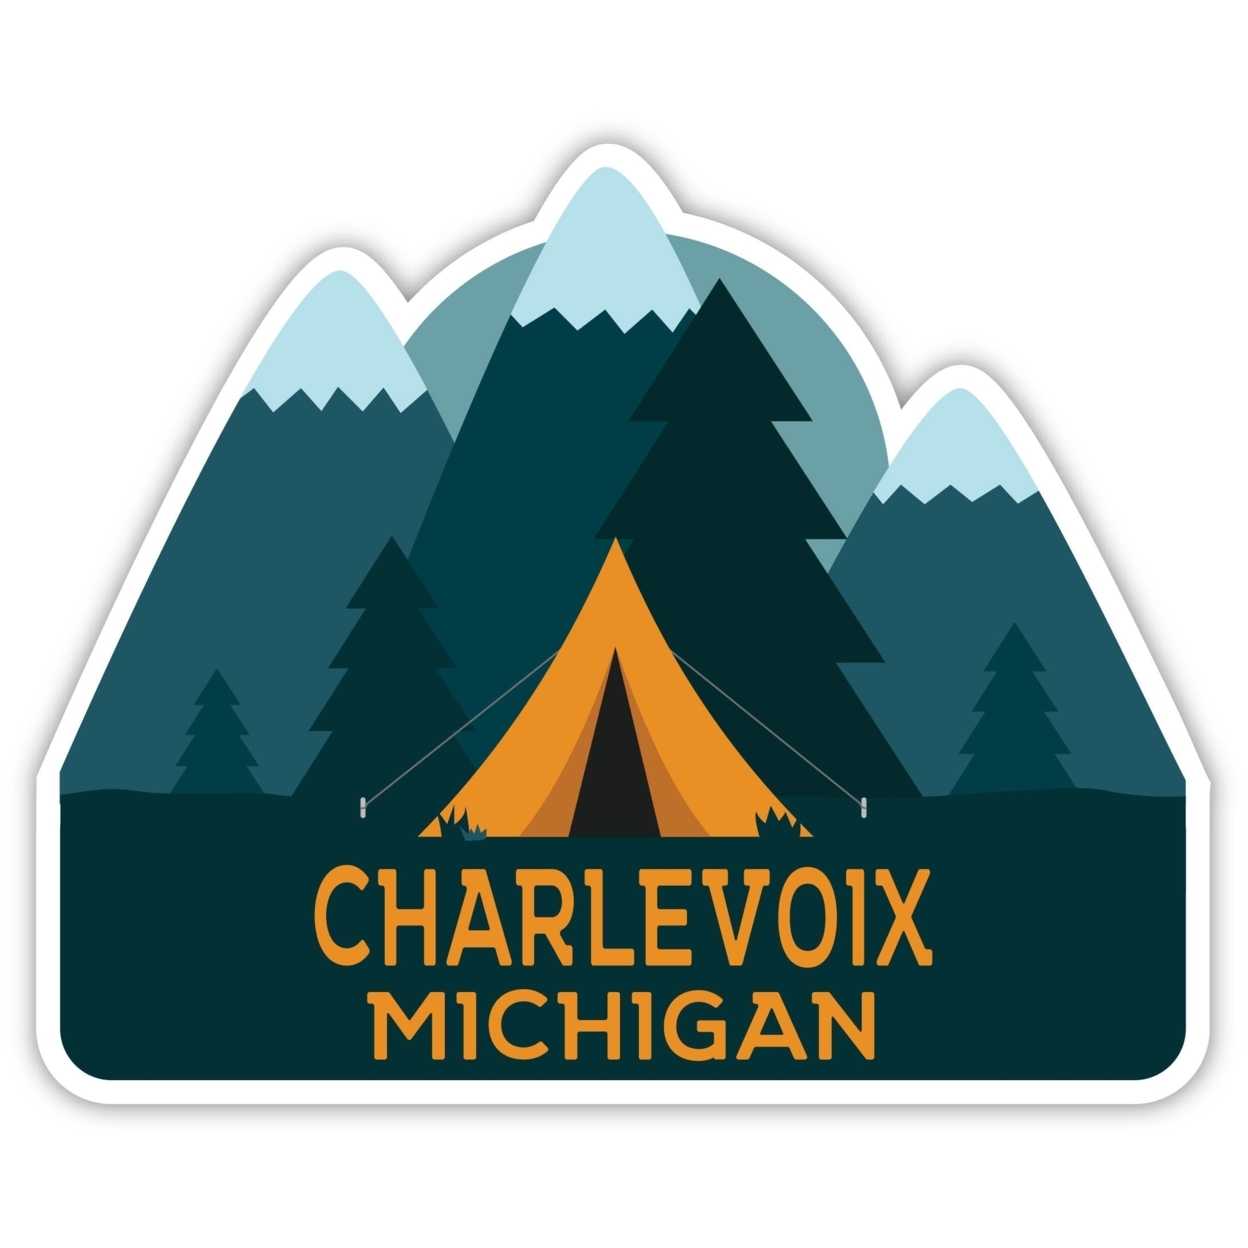 Charlevoix Michigan Souvenir Decorative Stickers (Choose Theme And Size) - 4-Pack, 12-Inch, Tent